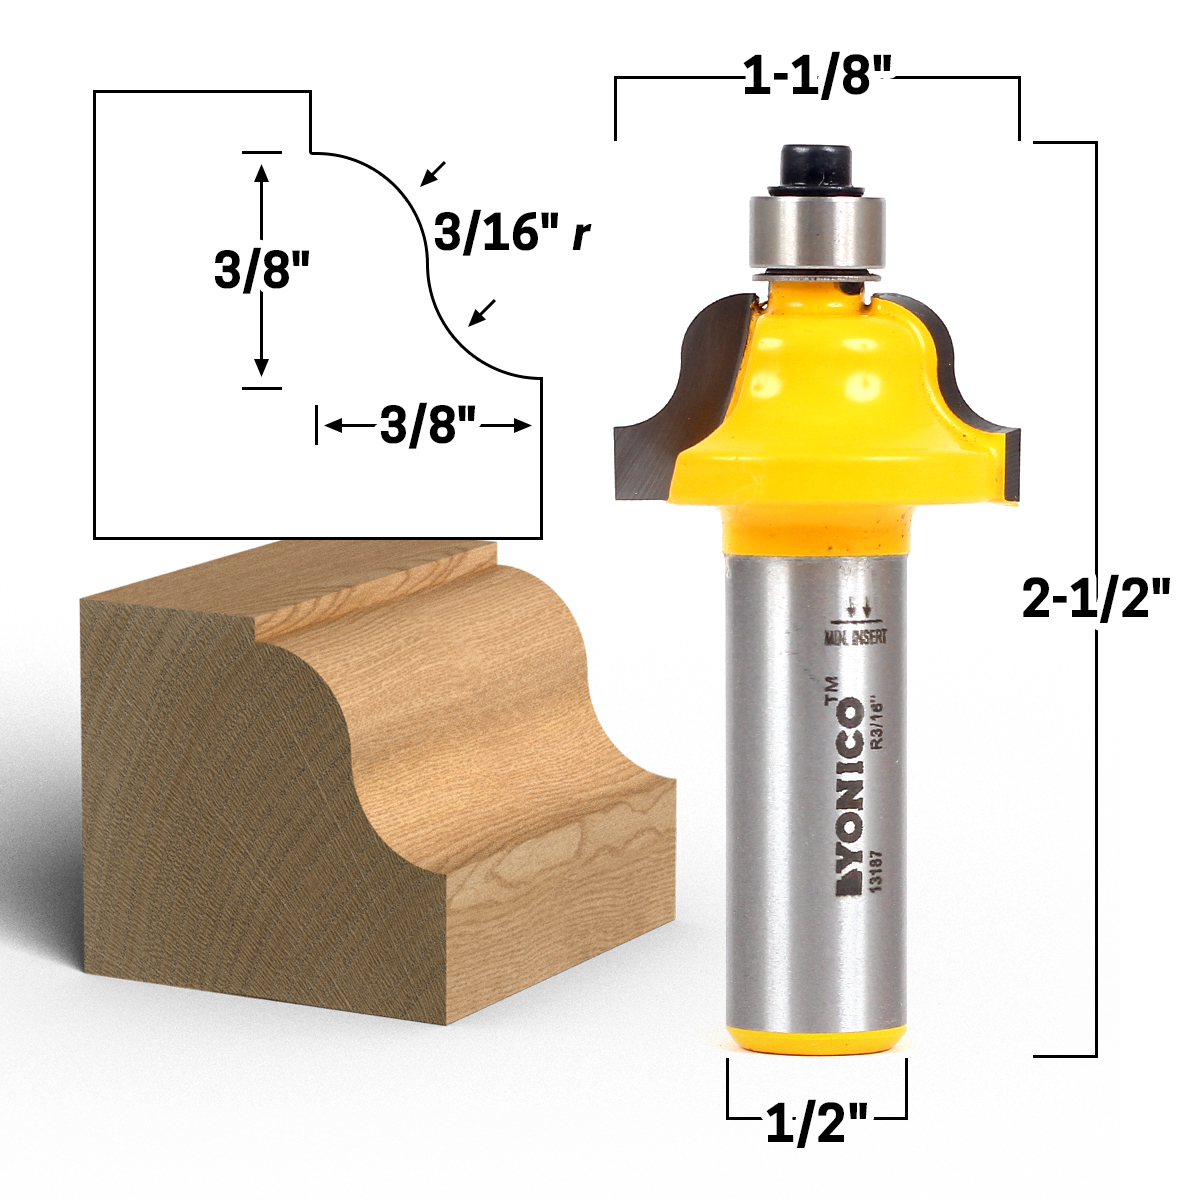 1 NEW  Yonico 1/8" R Double Roman Ogee Edge Profile Carbide Tip Router Bit y2 